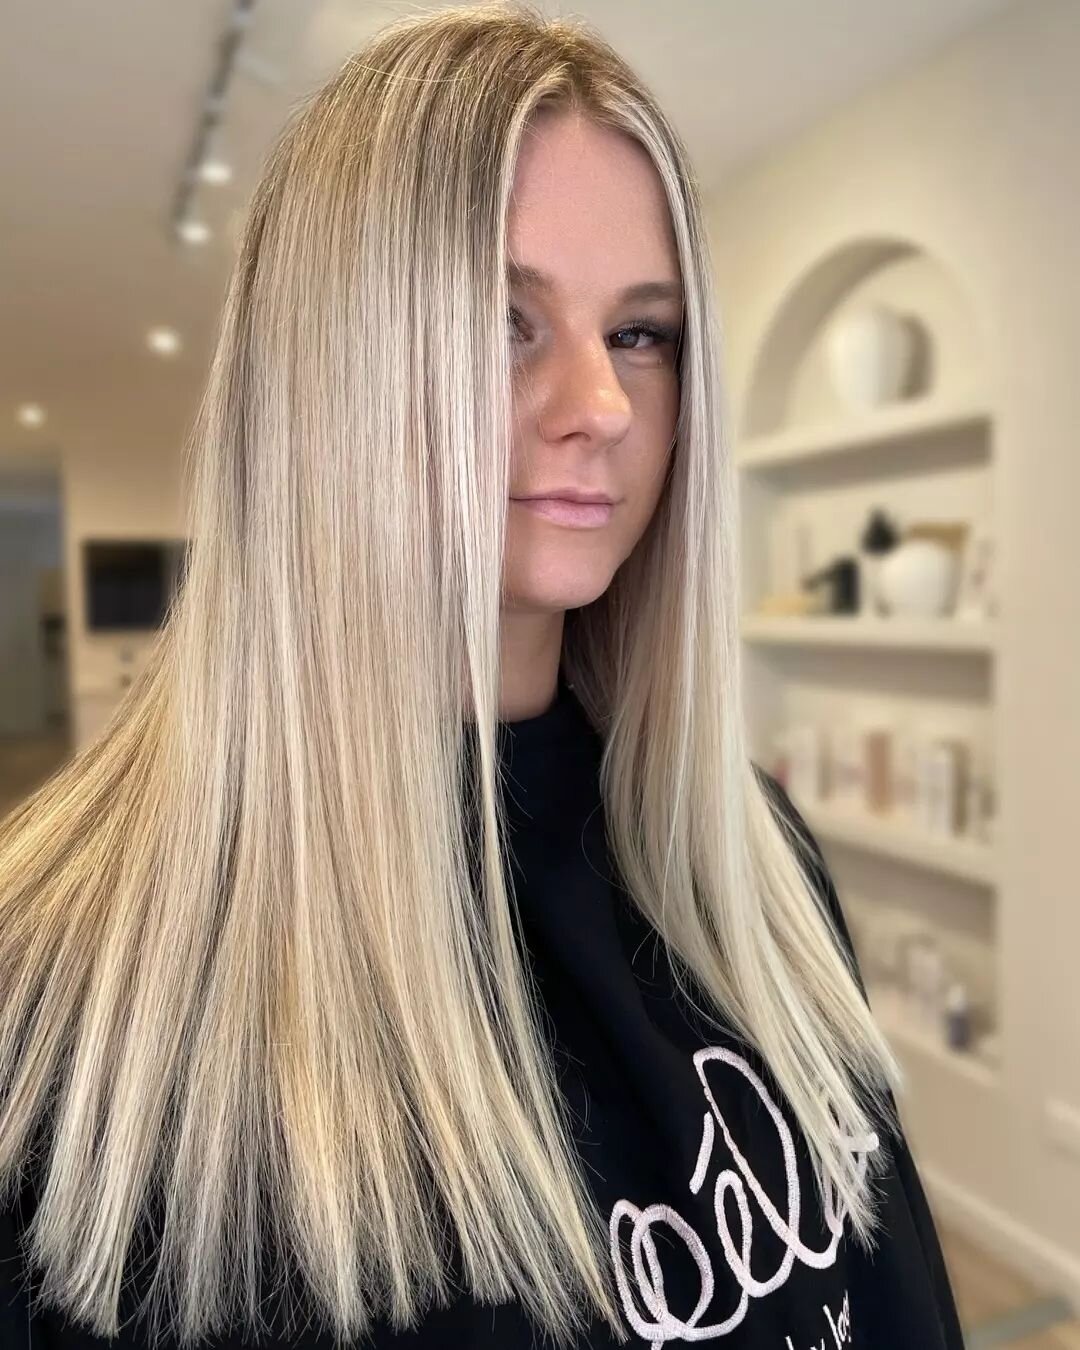 Creamy blonde will never go out of style - and we can see why 😍

Swipe for  before and after of this stunning freshen up by @tianna_pelobylago&nbsp; #peloblondes #creamyblonde